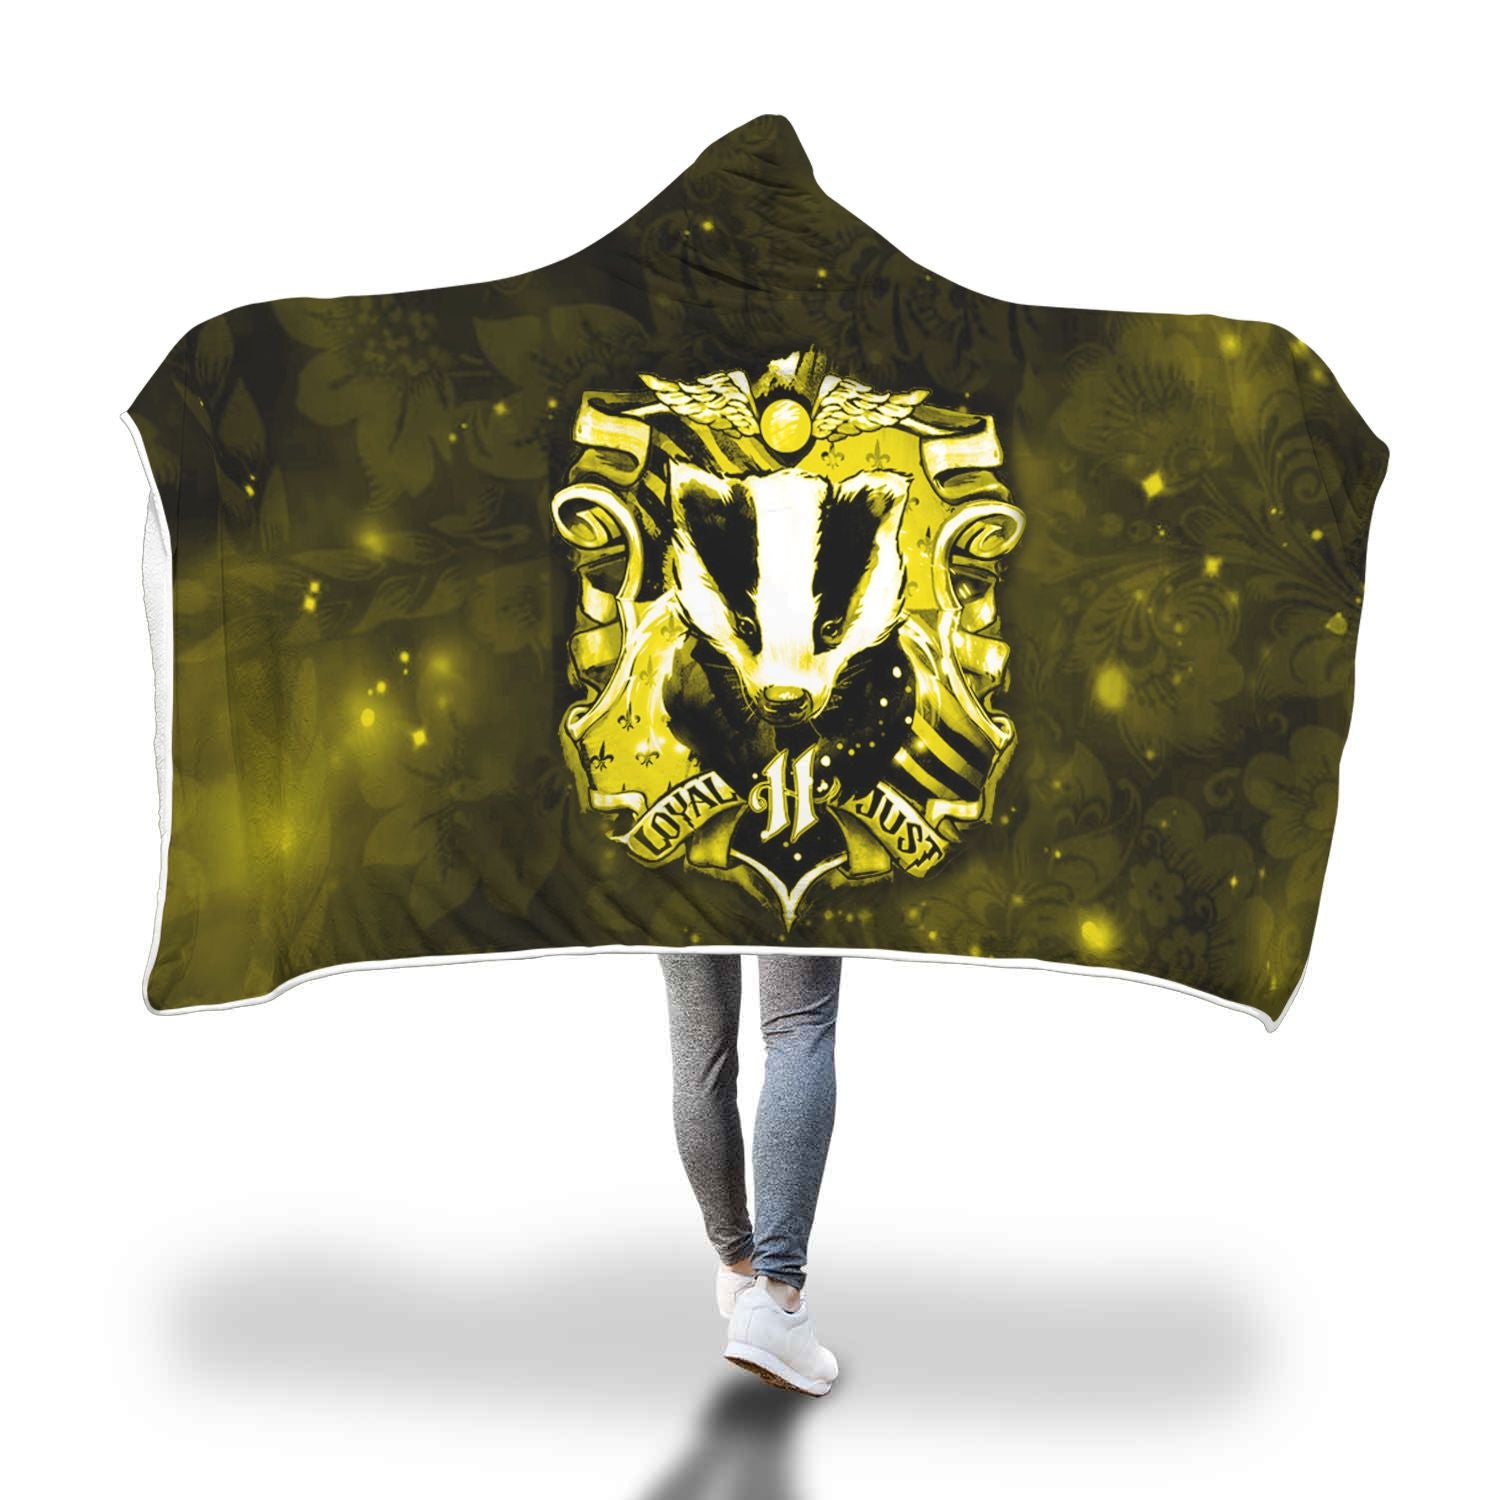 The Hufflepuff Badger Harry Potter Version Galaxy 3D Hooded Blanket Adult 80"x60"  